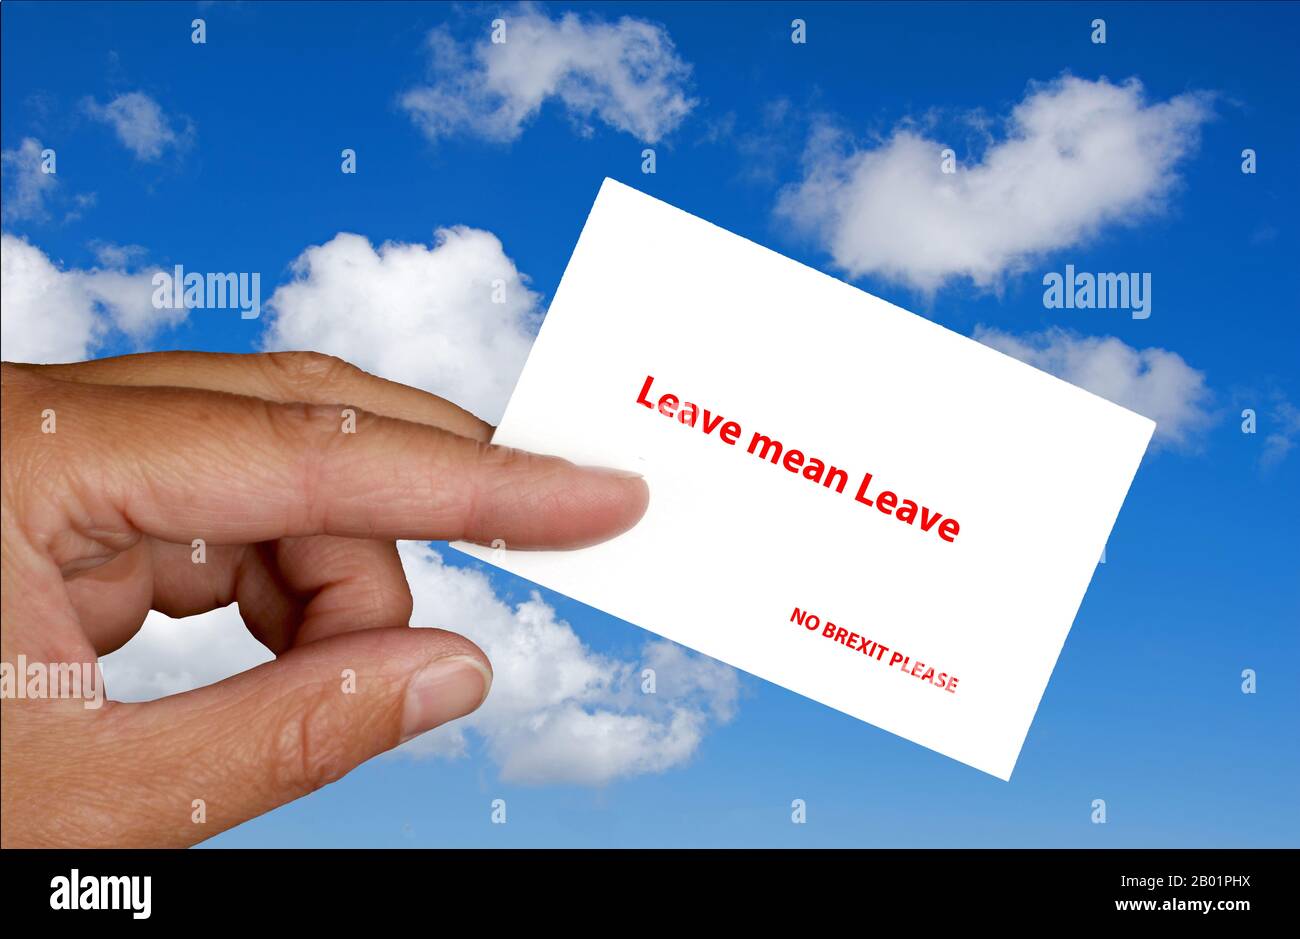 hand against blue sky holding card lettering leave mean leave, No brexit please, Germany Stock Photo